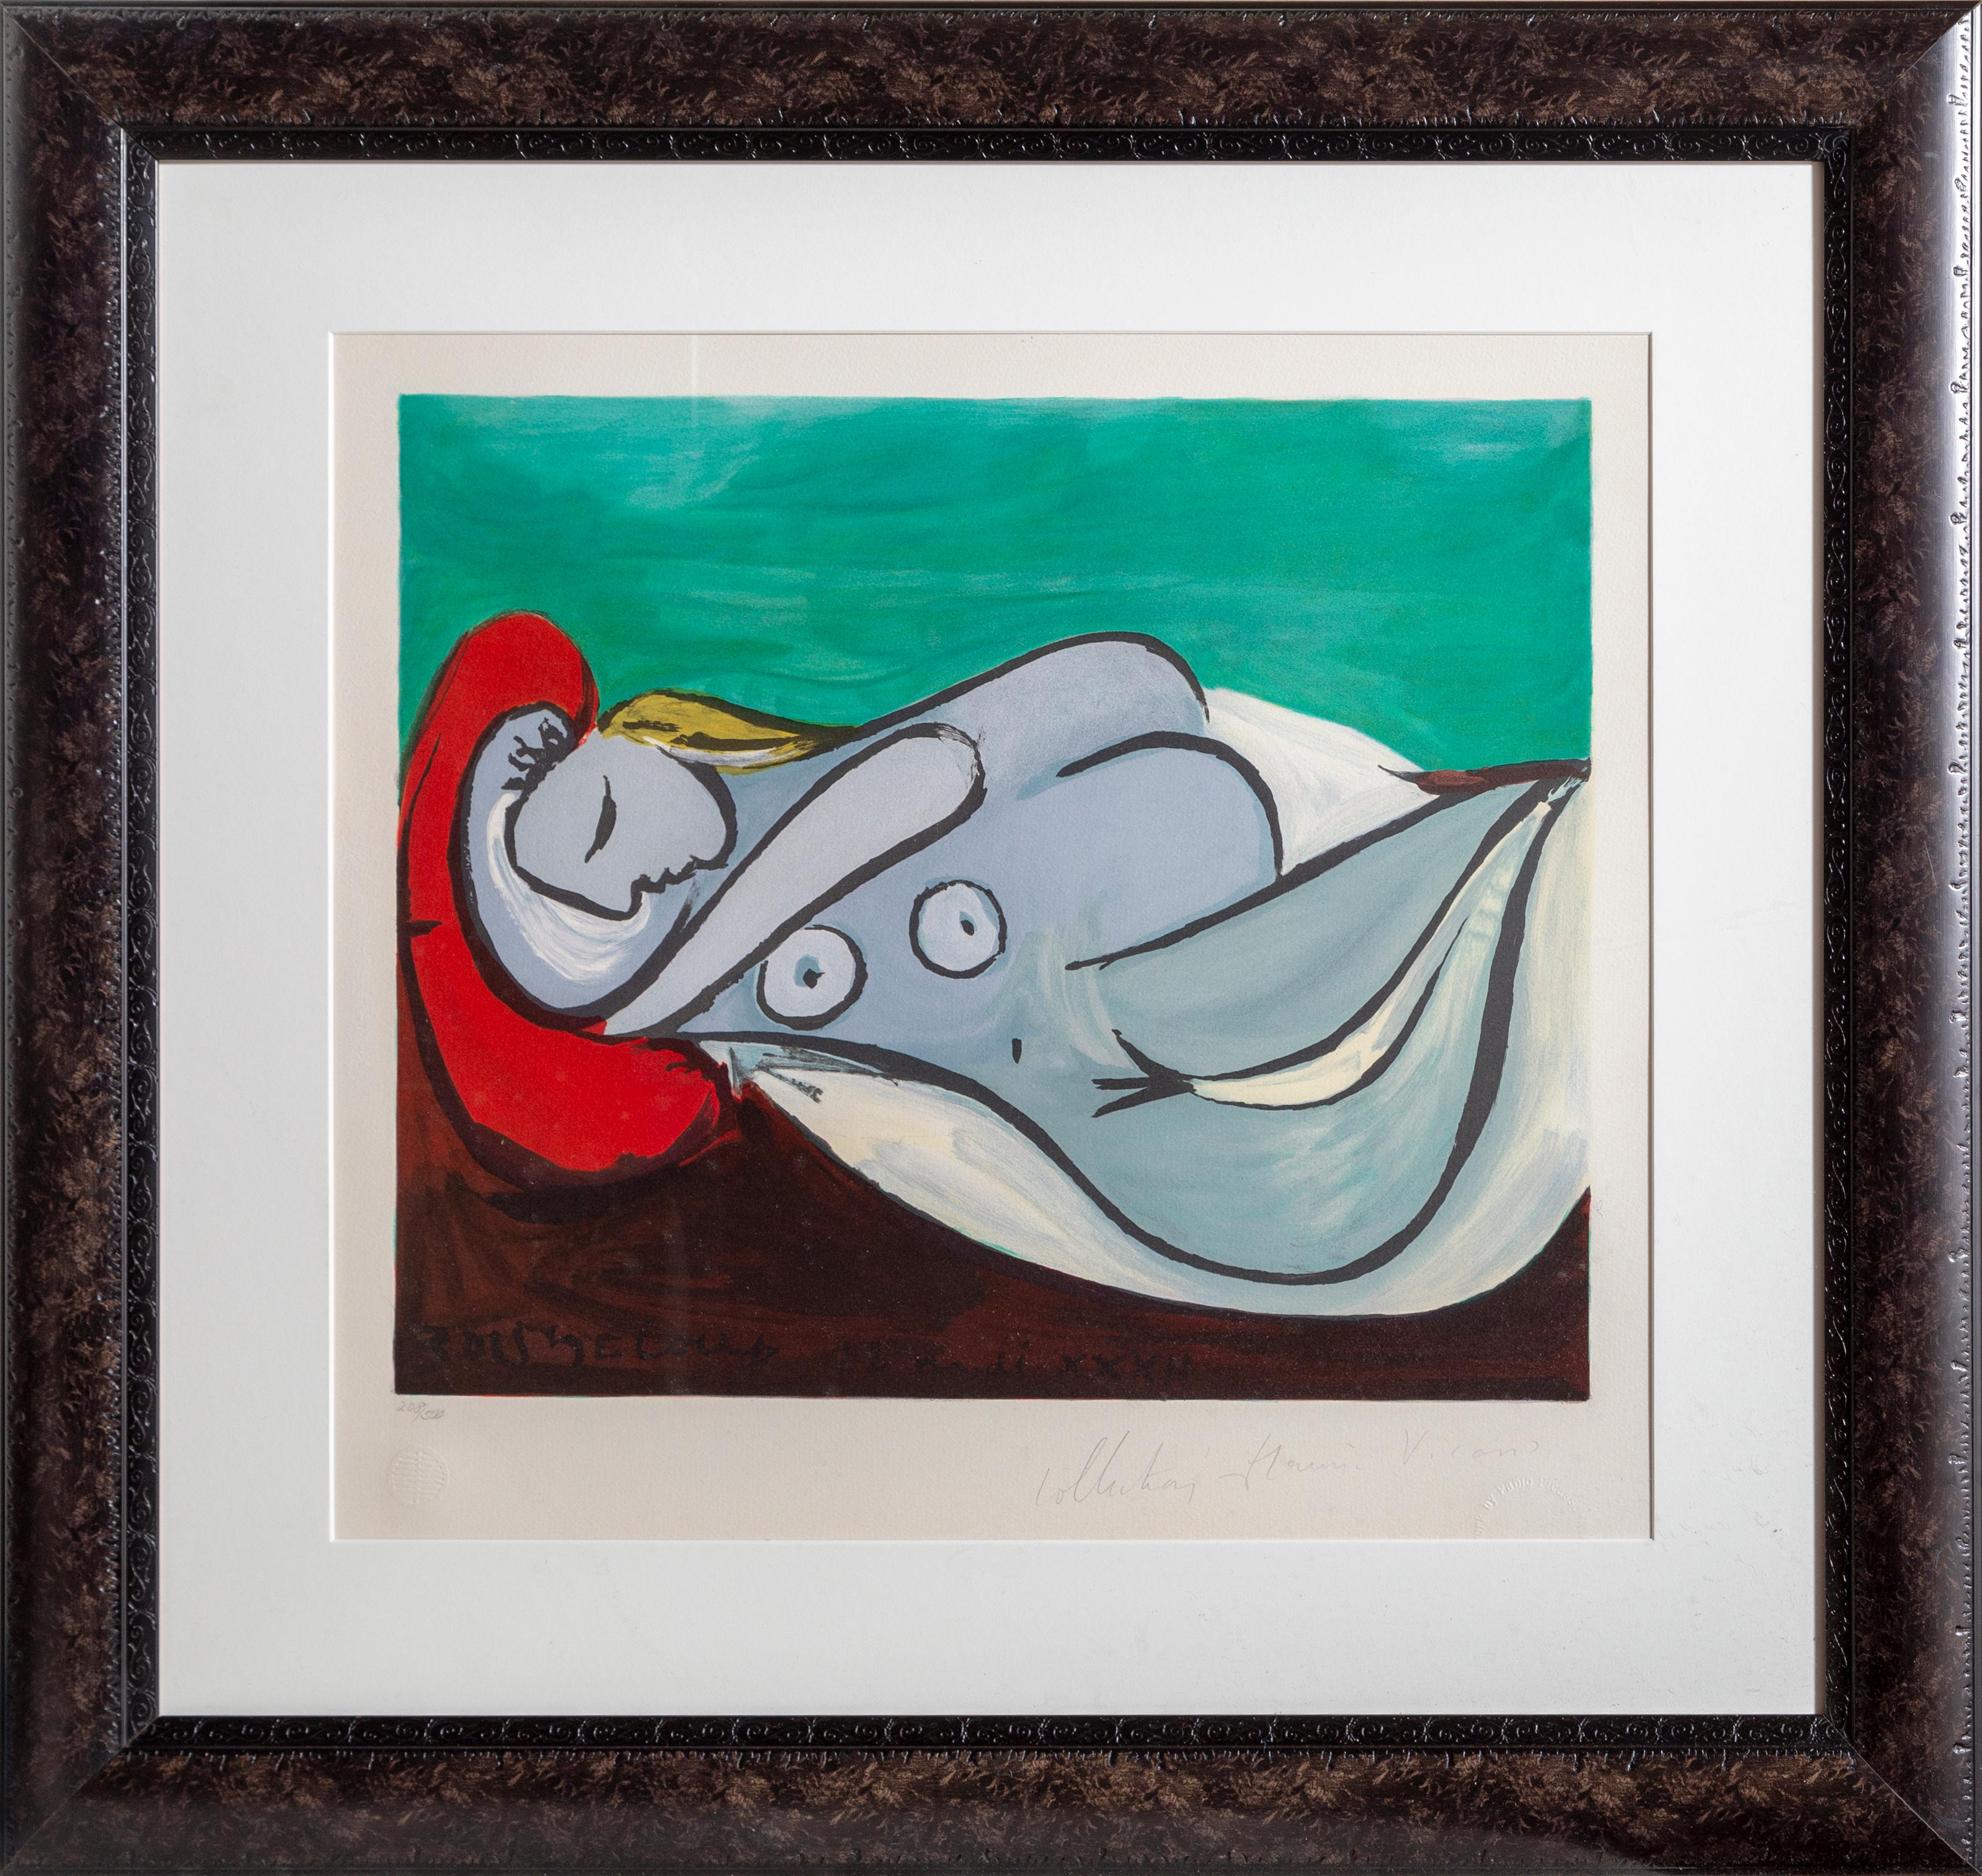 A lithograph from the Marina Picasso Estate Collection after the Pablo Picasso painting "Formeuse a l'Oreiller (Marie-Therese Walter)".  The original painting was completed in 1932. In the 1970's after Picasso's death, Marina Picasso, his